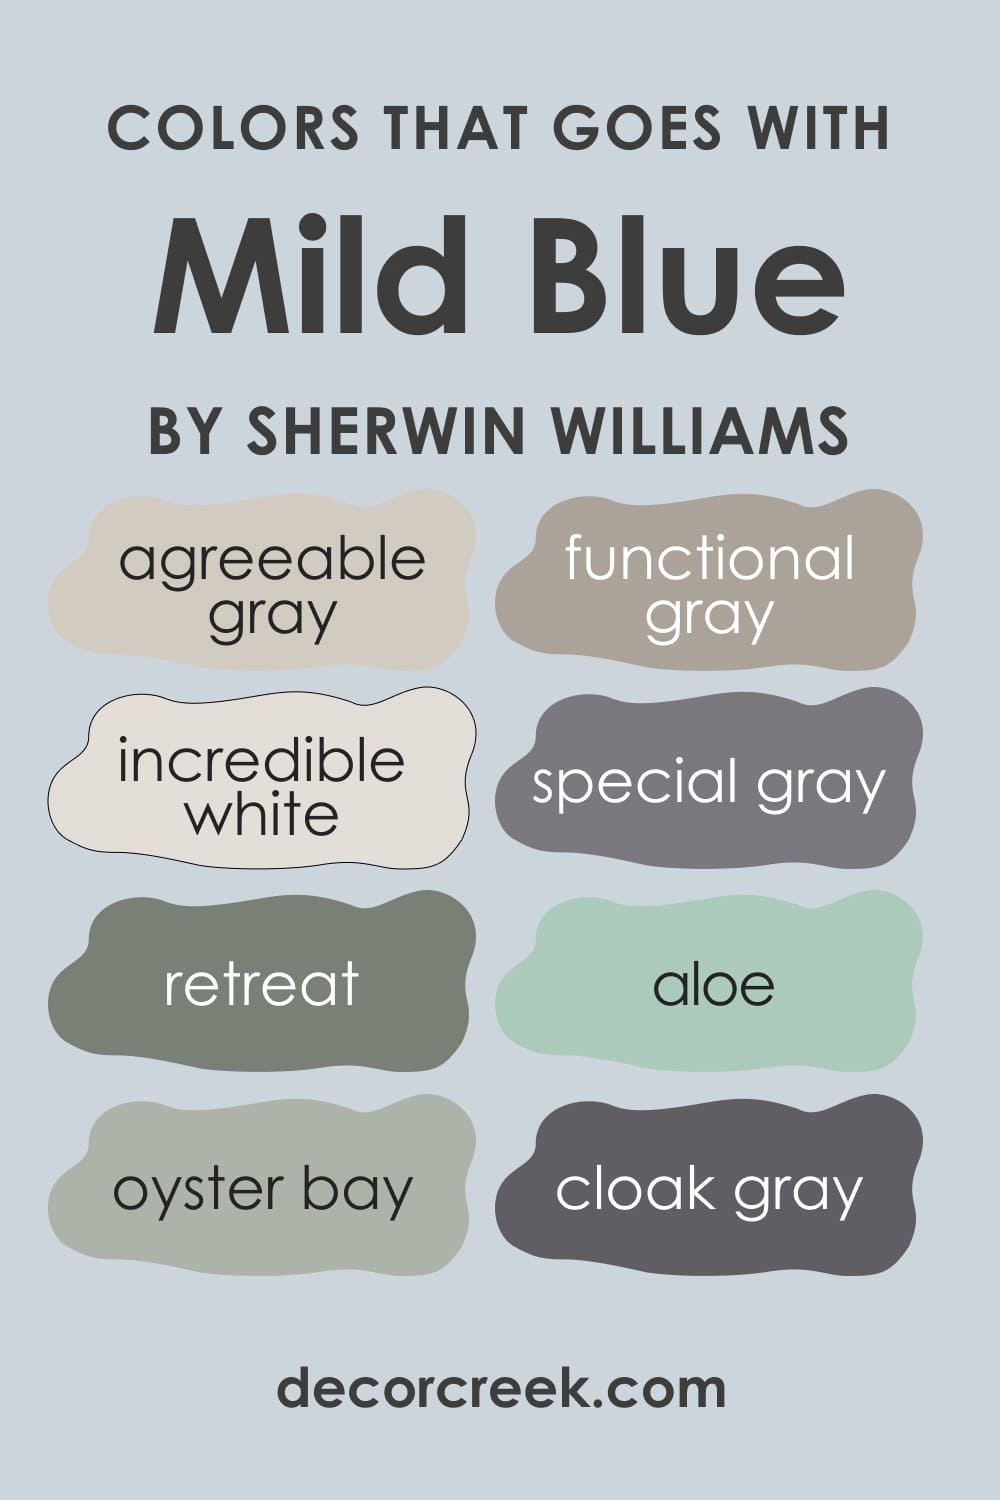 Colors That Go With Mild Blue SW-6533